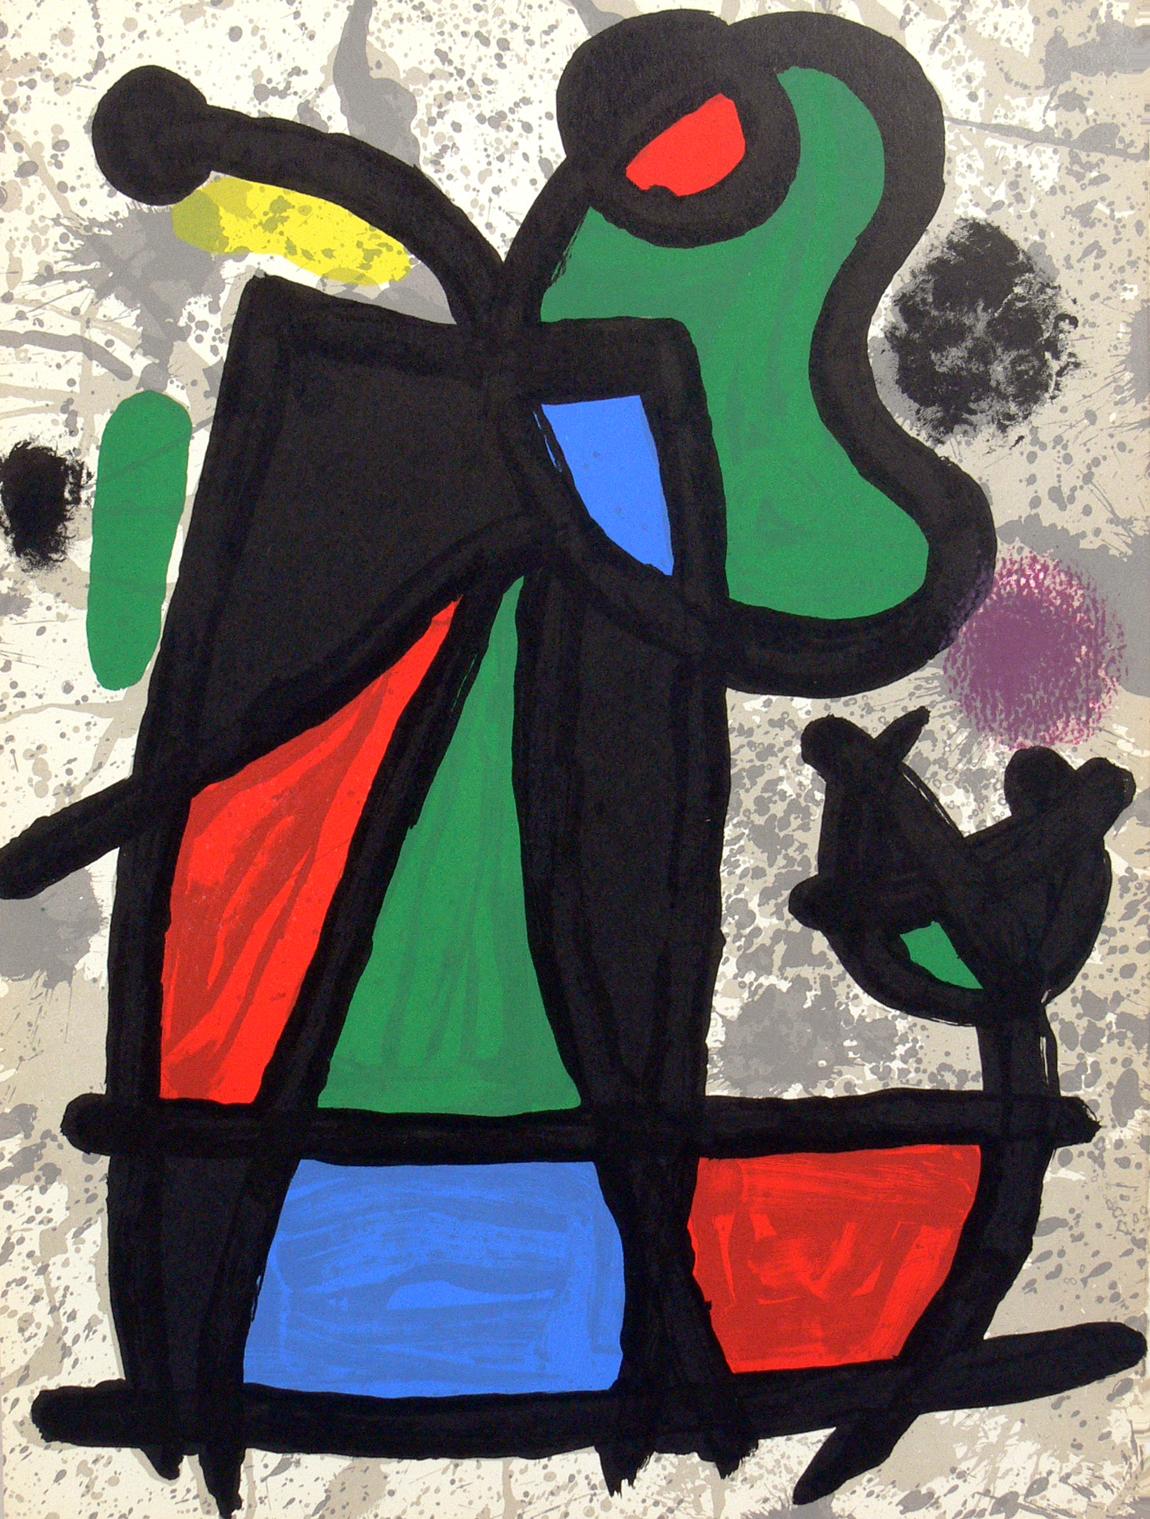 Selection of Joan Miro color lithographs, France, circa 1960s. We purchased a group of these color lithographs from the estate of a couple that lived in France from 1951-1983. These are most likely from the limited edition folio “Derriere le